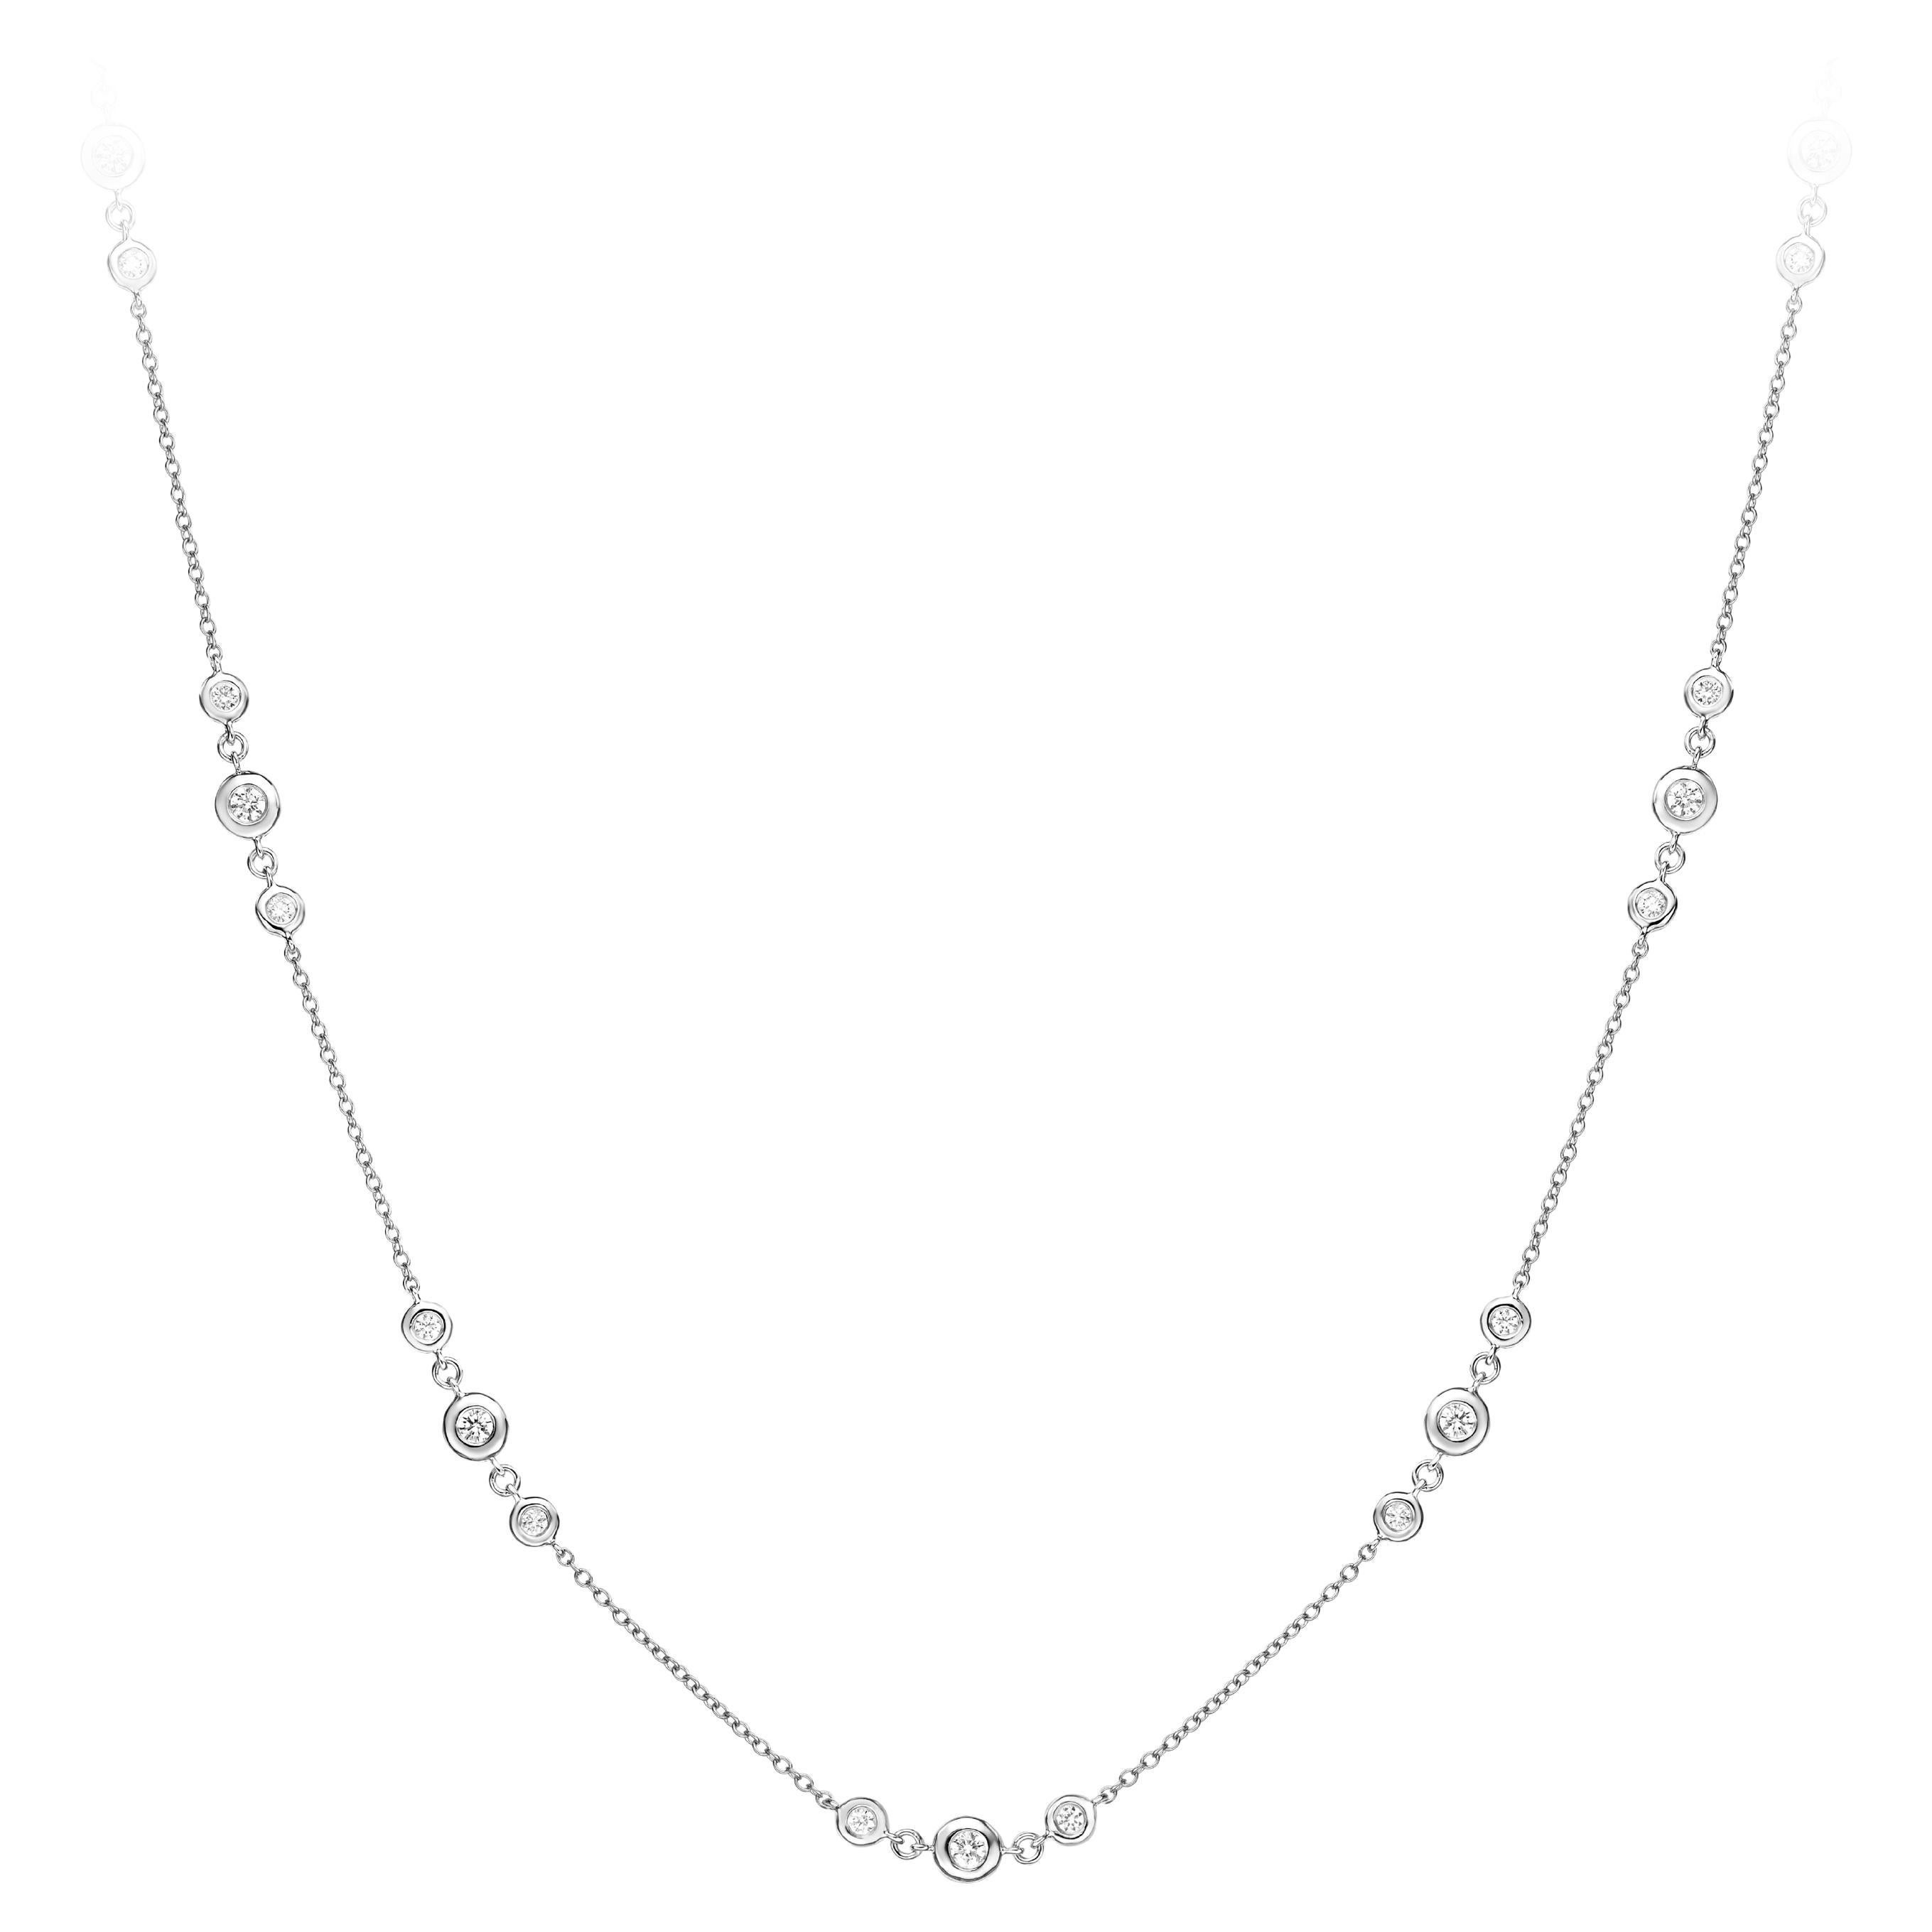 GILIN 18K White Gold Diamond Necklace For Sale